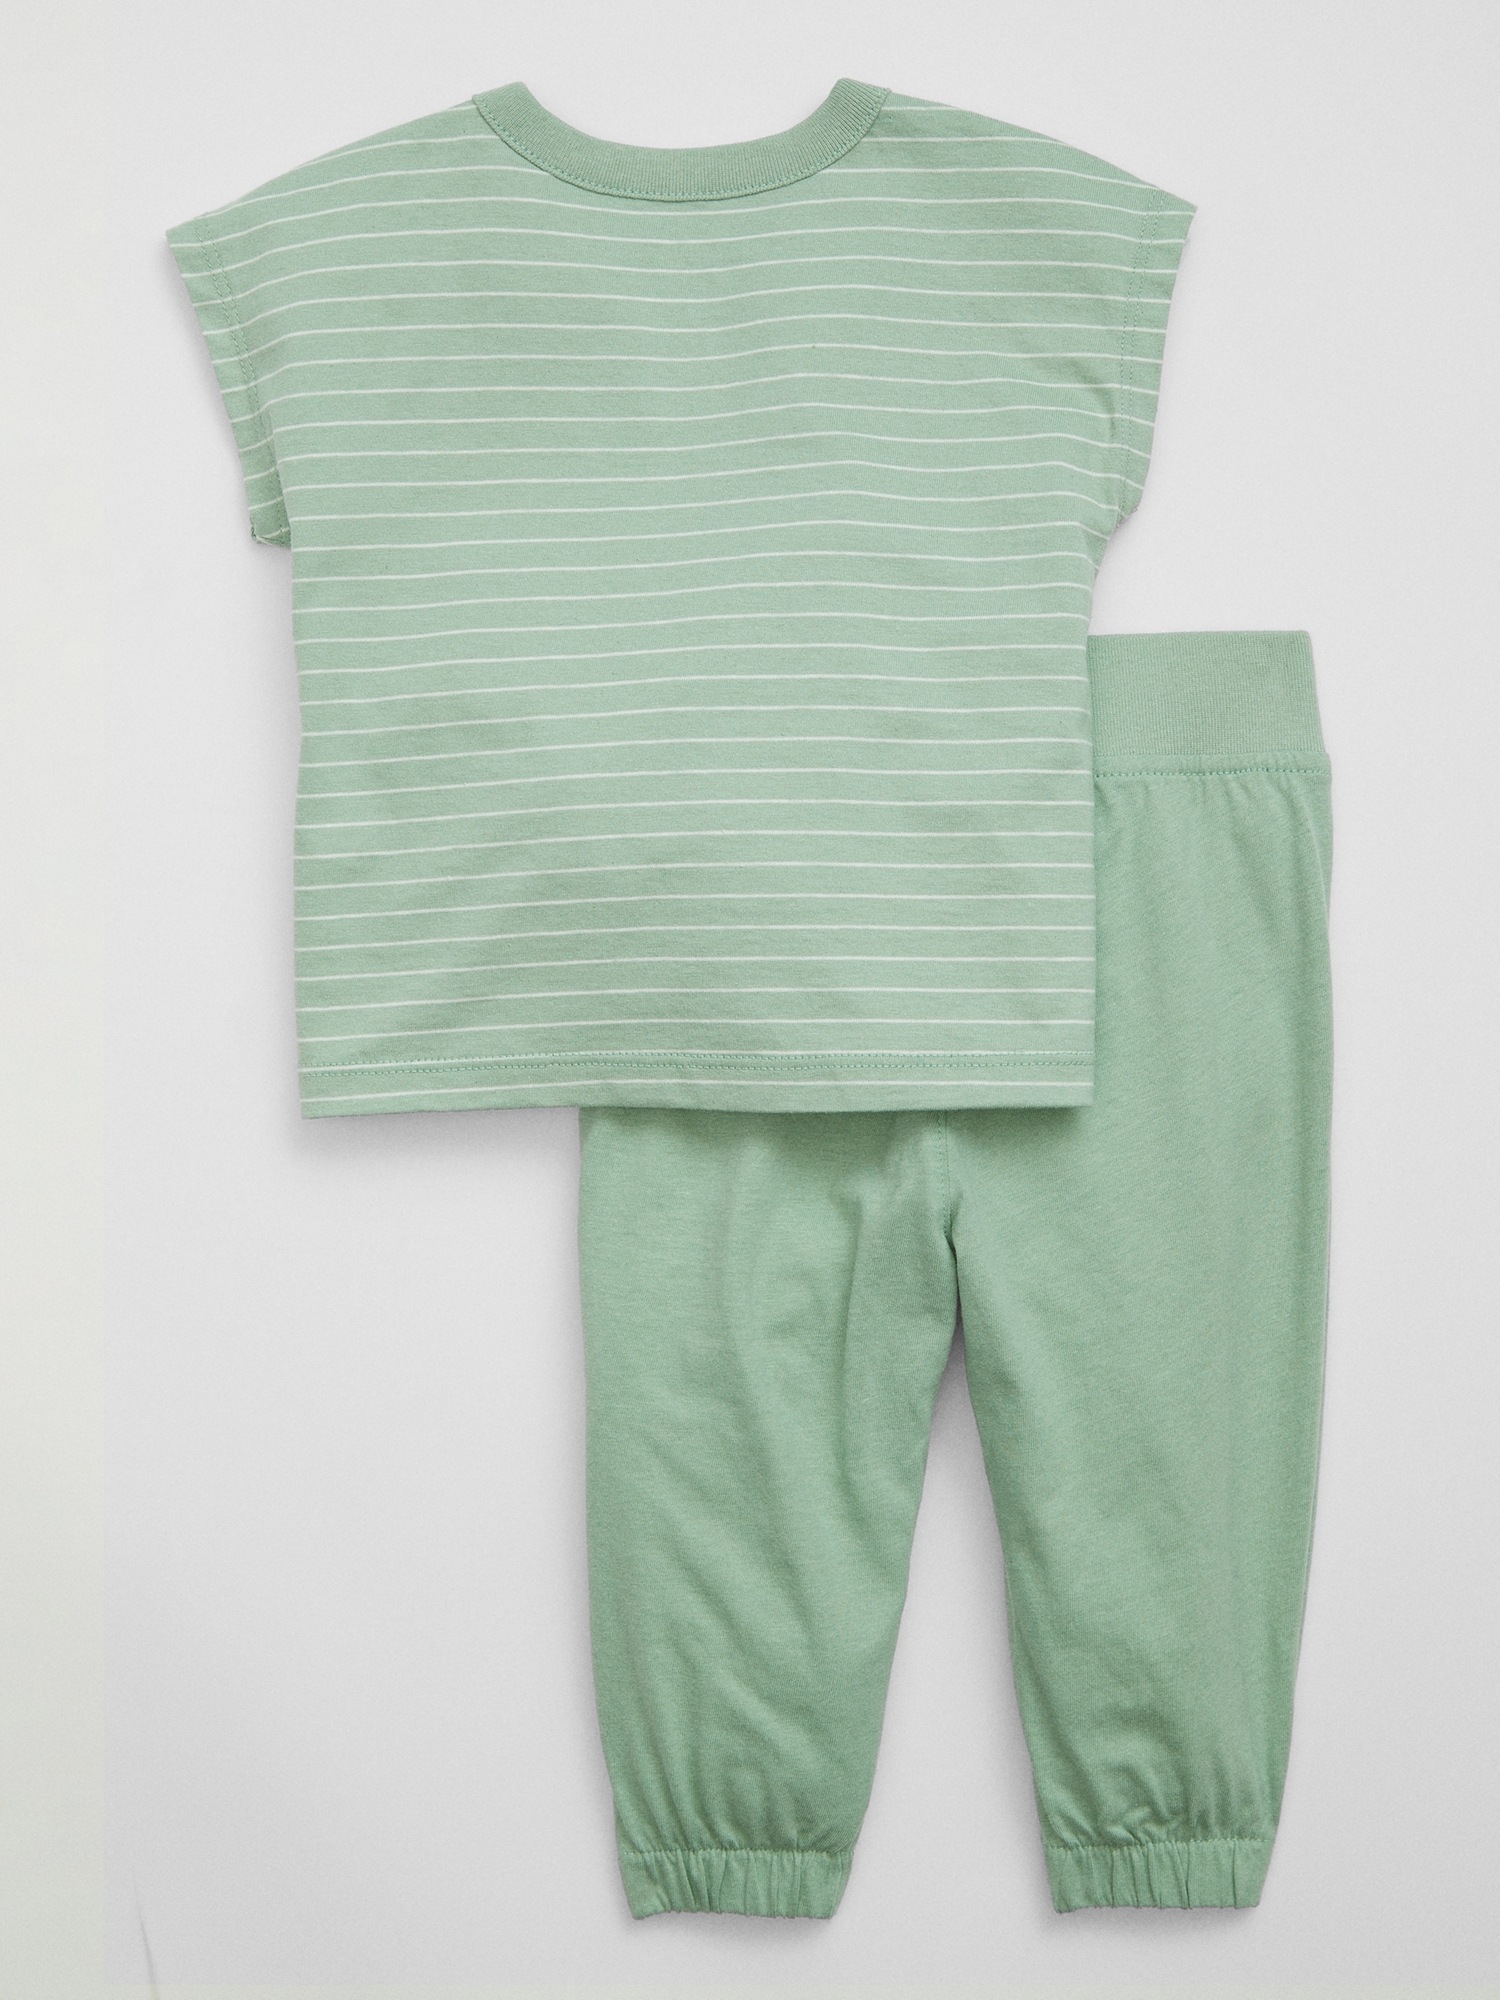 Baby Jogger Two-Piece Outfit Set | Gap Factory